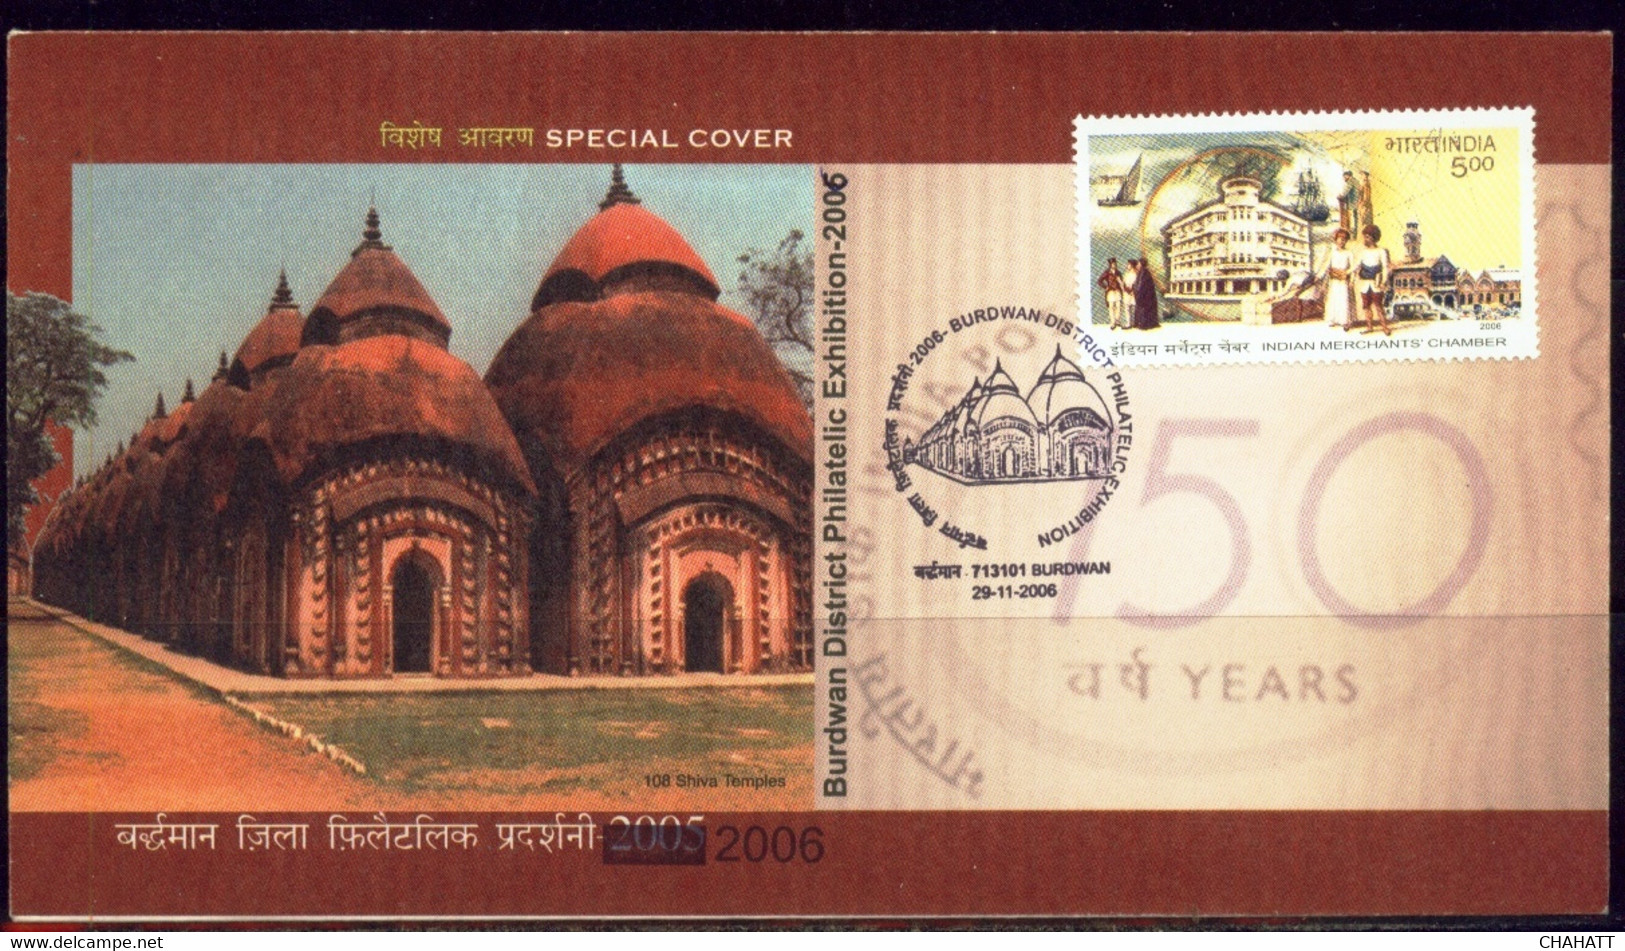 HINDUISM- LORD SHIVA- TERRACOTTA TEMPLE-BURDWAN-SPECIAL COVER- PICTORIAL CANCEL-USED-INDIA-2006-BX3-41 - Hinduismo